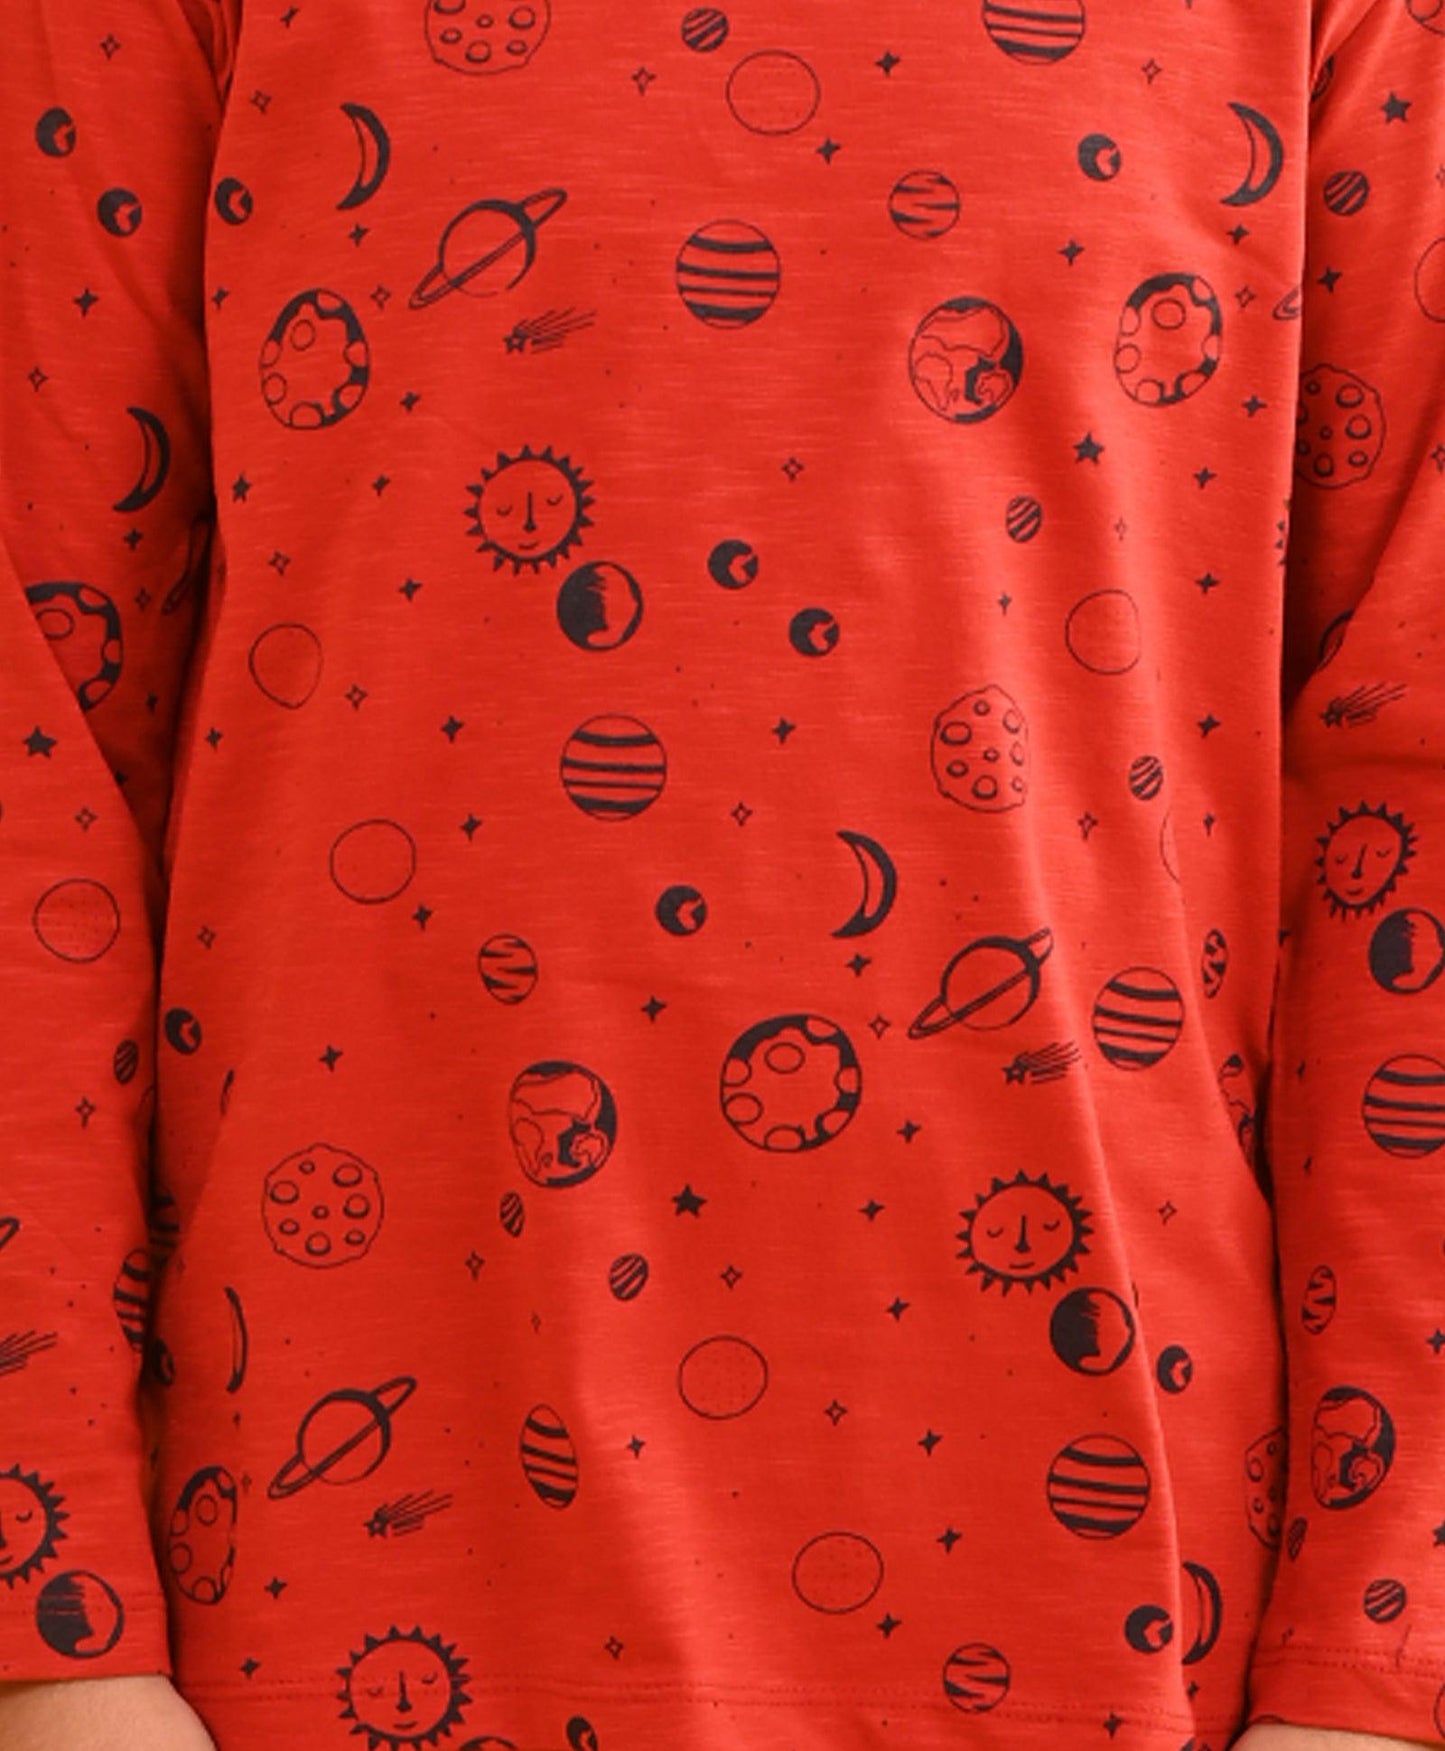 RED SOLAR SYSTEM LONG SLEEVES PYJAMA SET - RED